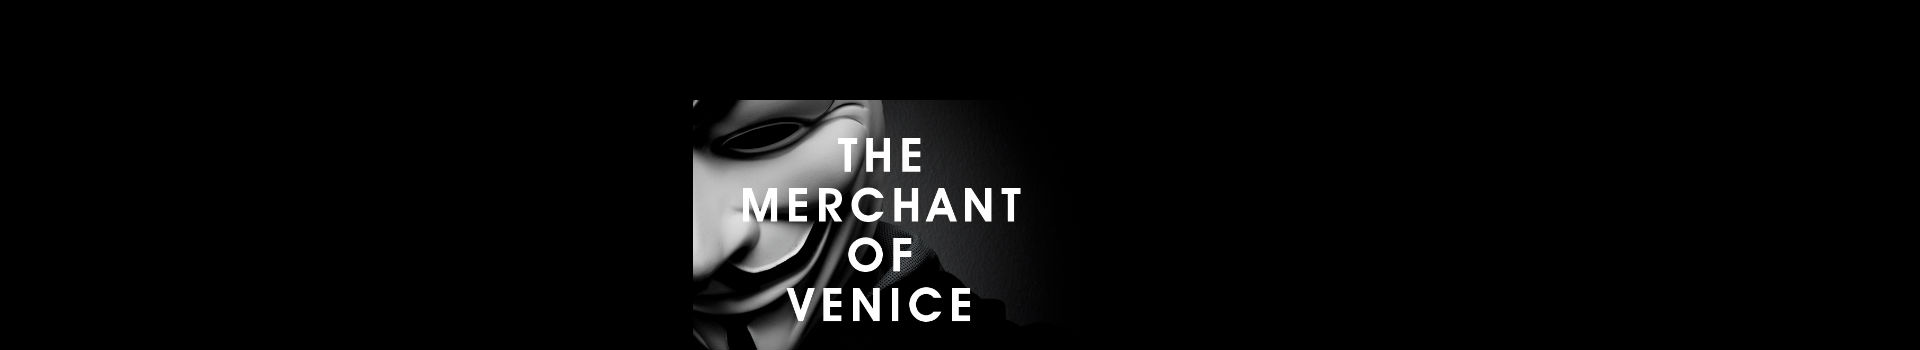 National Youth Theatre: The Merchant Of Venice tickets